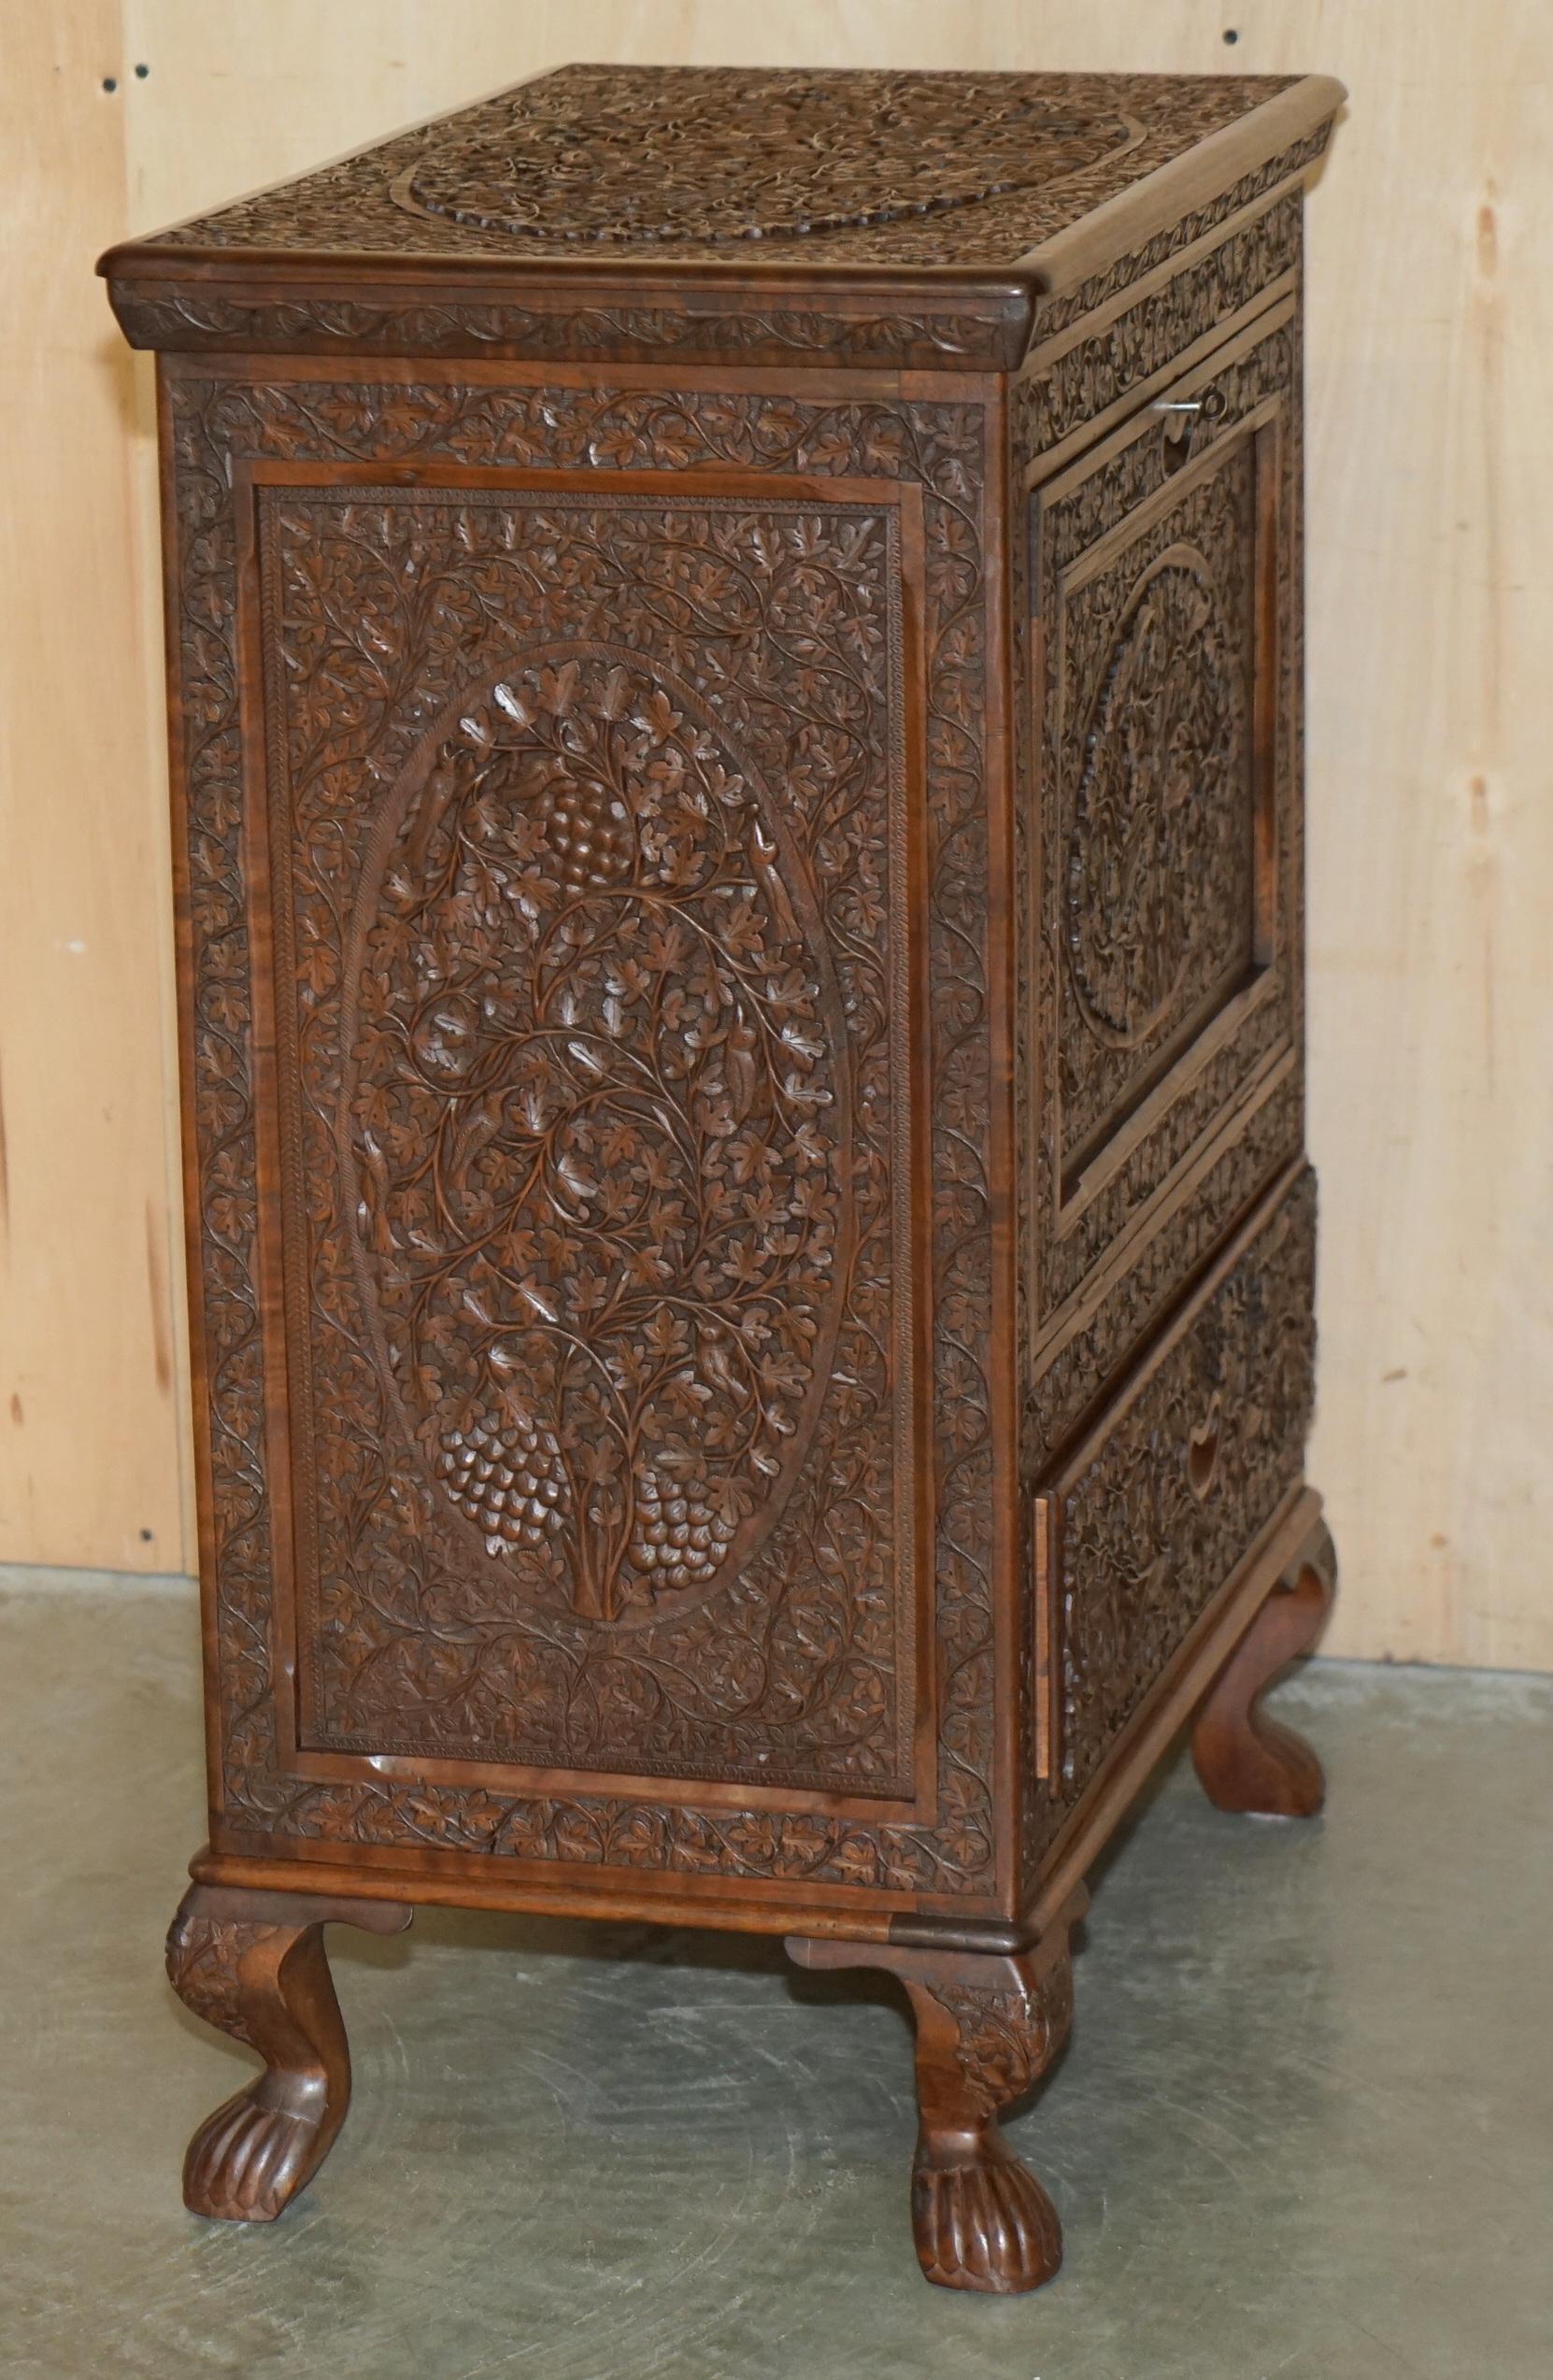 ANTIQUE ORNATELY CARVED BRiTISH COLONIAL BURMESE DRINKS CABINET BAR WITH KEY For Sale 5